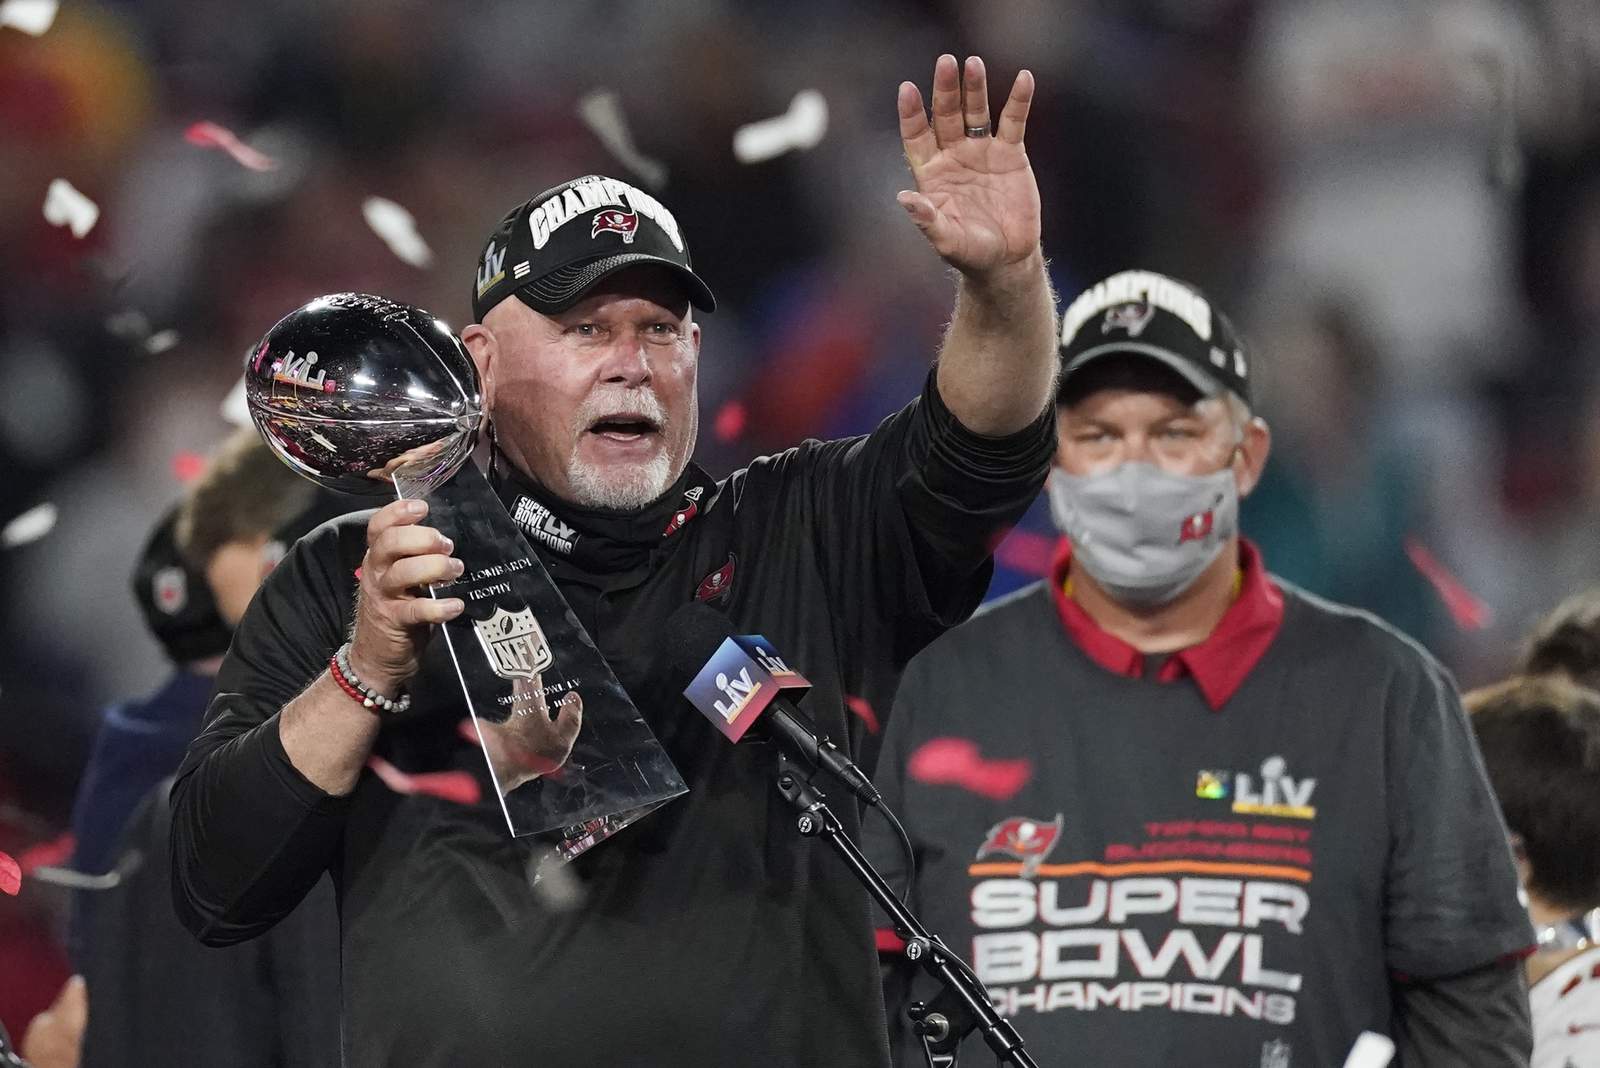 Bucs' Arians scoffs at rumors, says he's returning 'for 2'